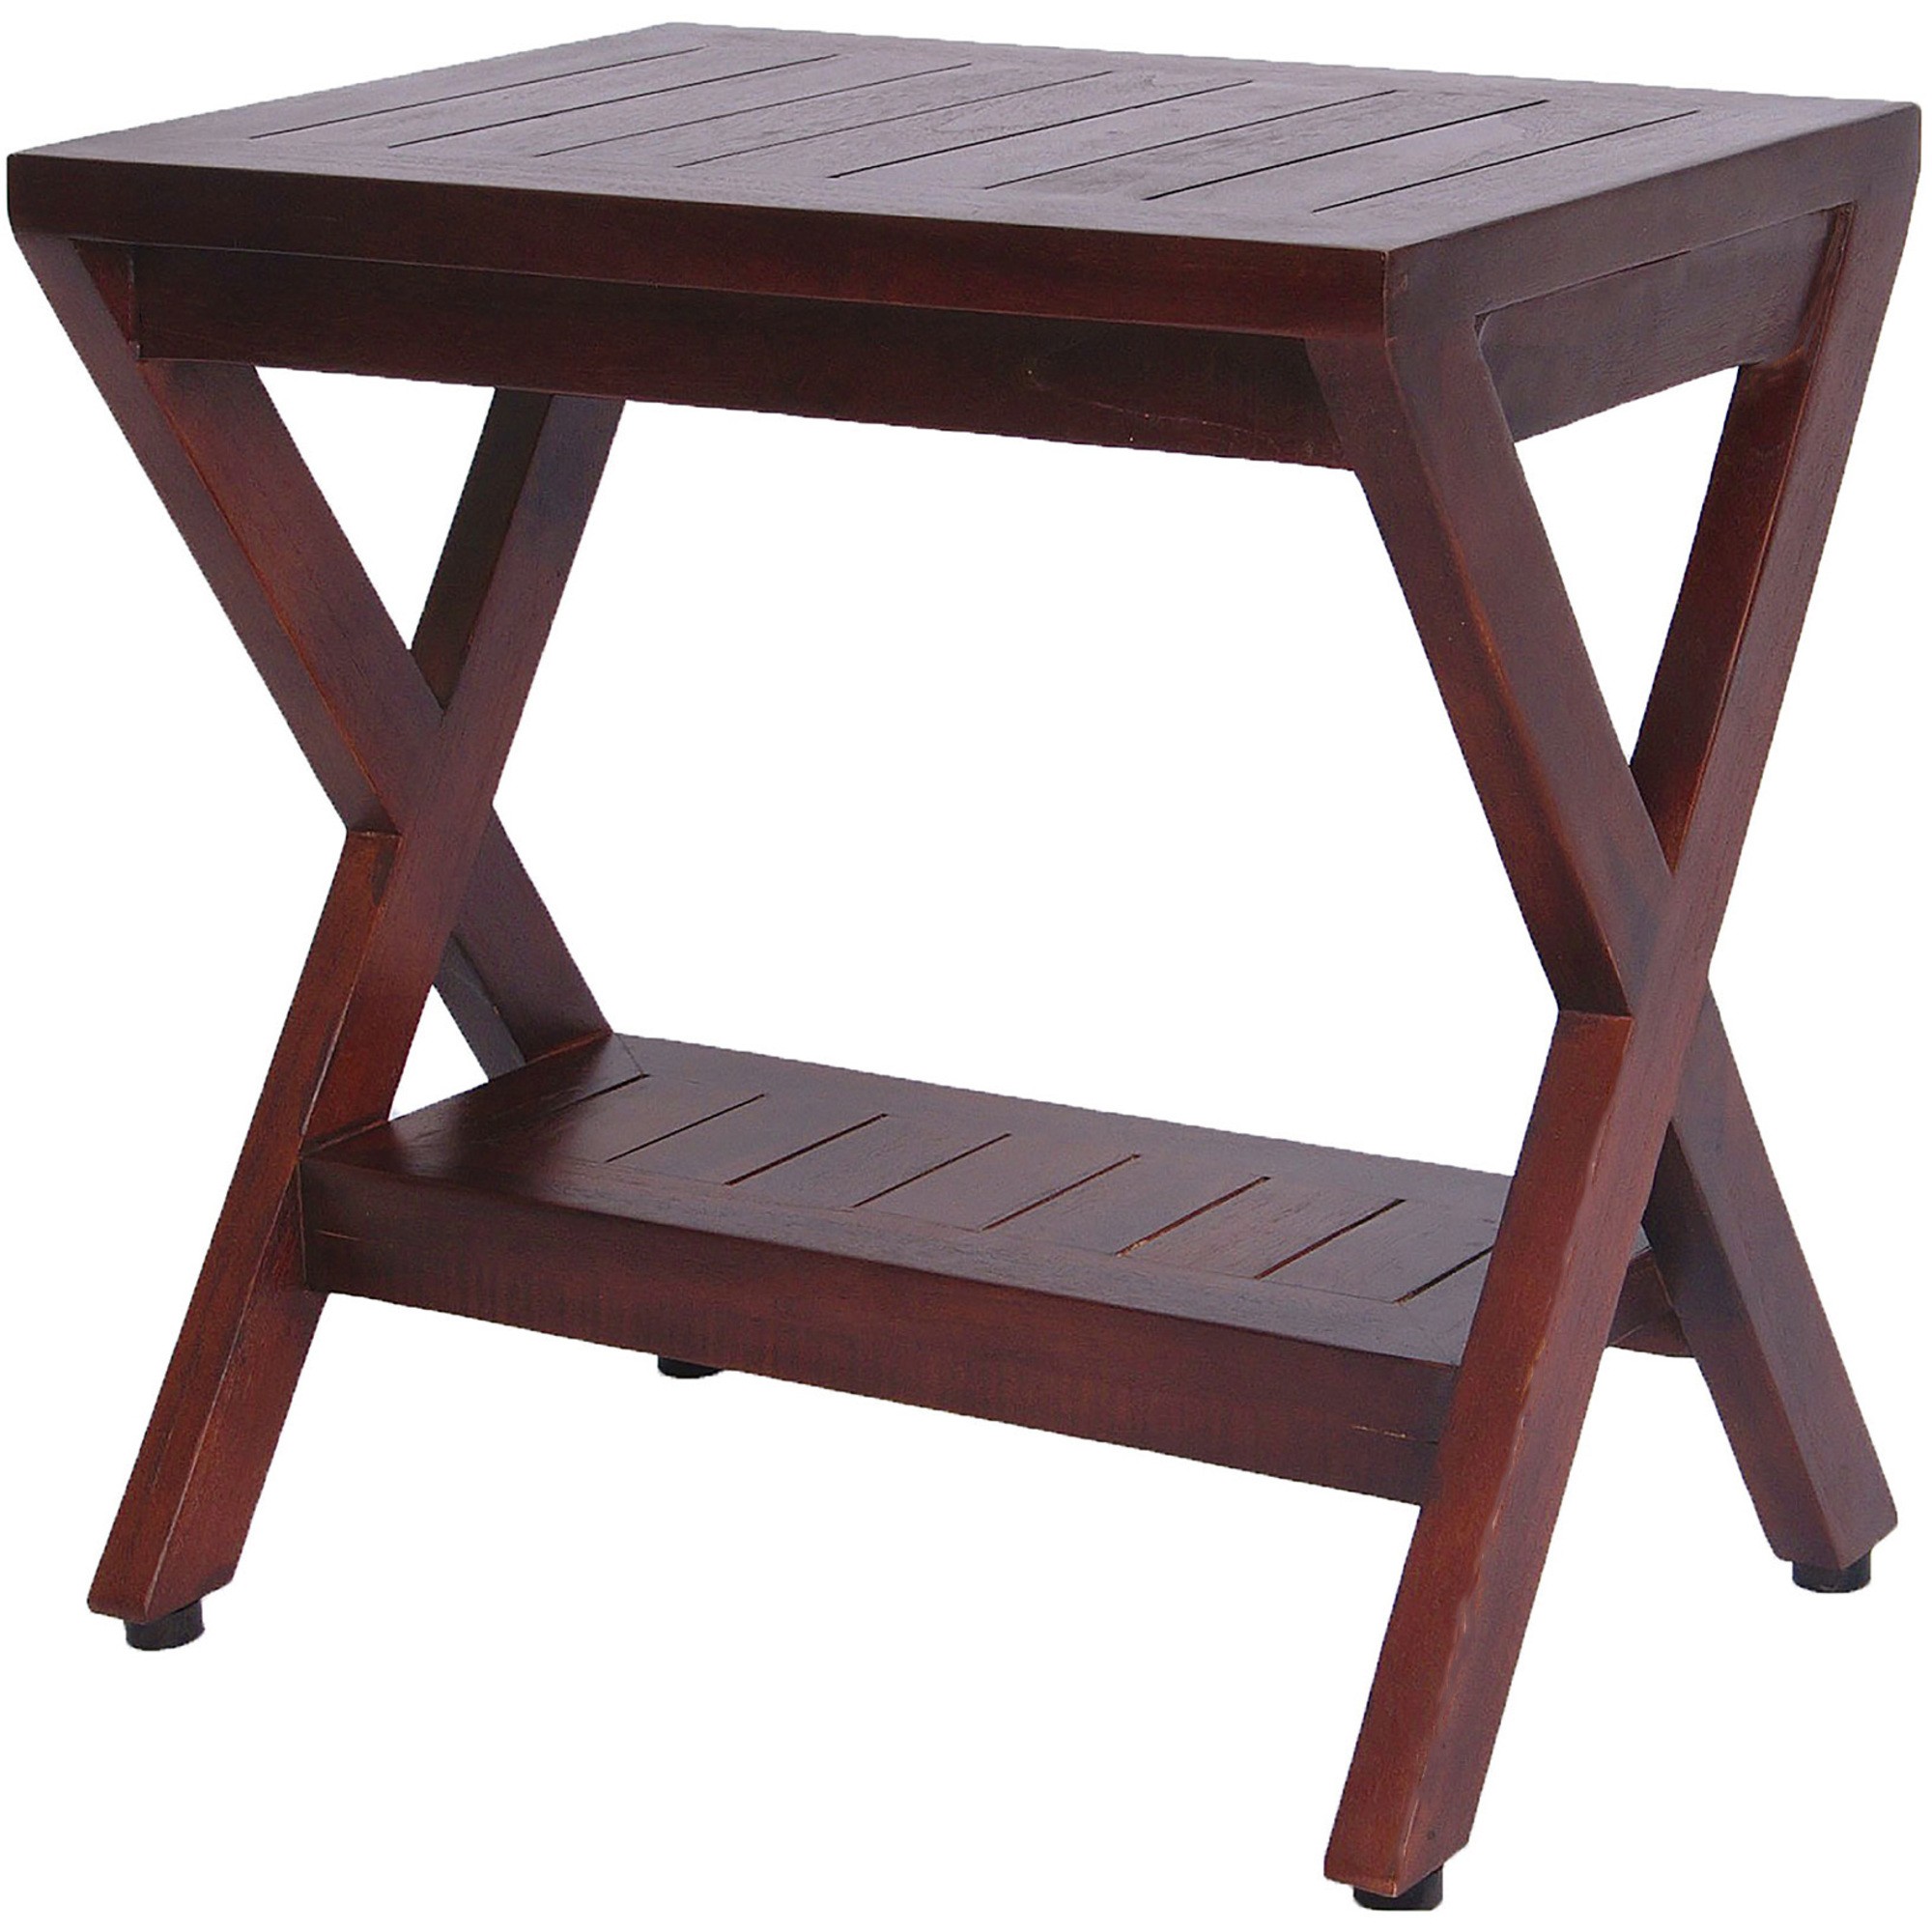 Compact X Shape Teak Shower Outdoor Bench with Shelf in Brown Finish